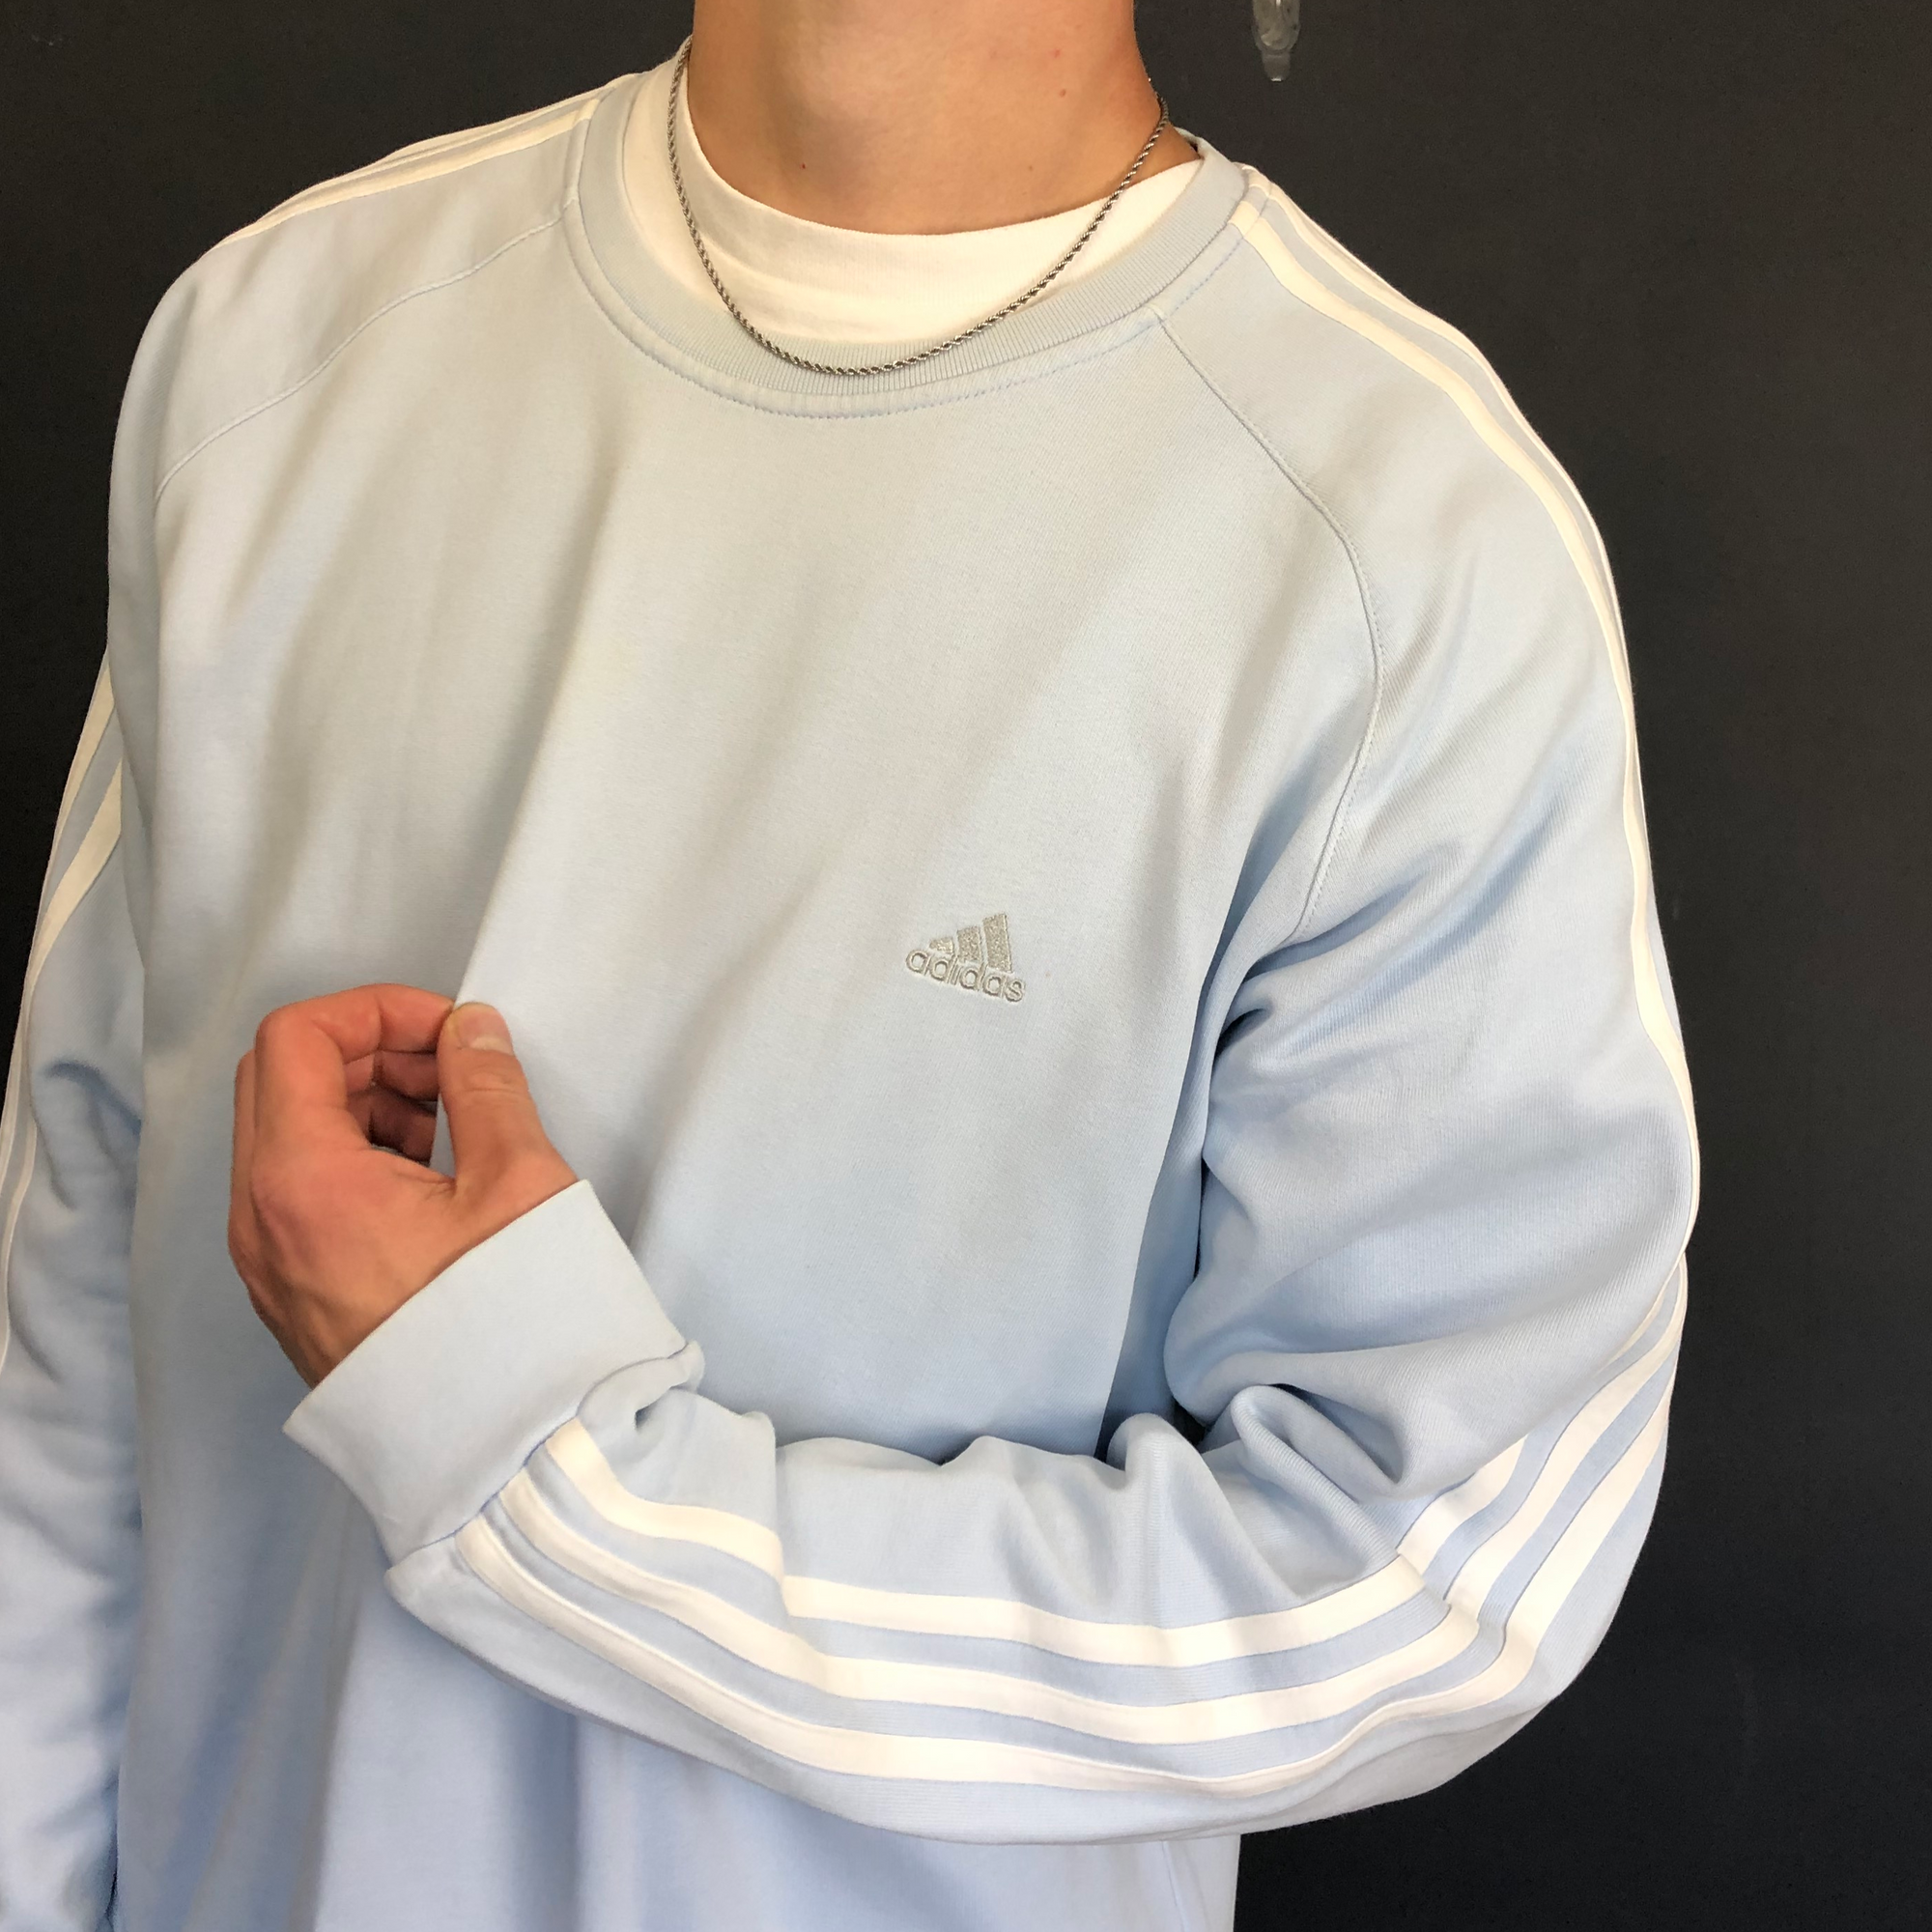 VINTAGE ADIDAS SWEATSHIRT WITH EMBROIDERED LOGO - Vintique Clothing